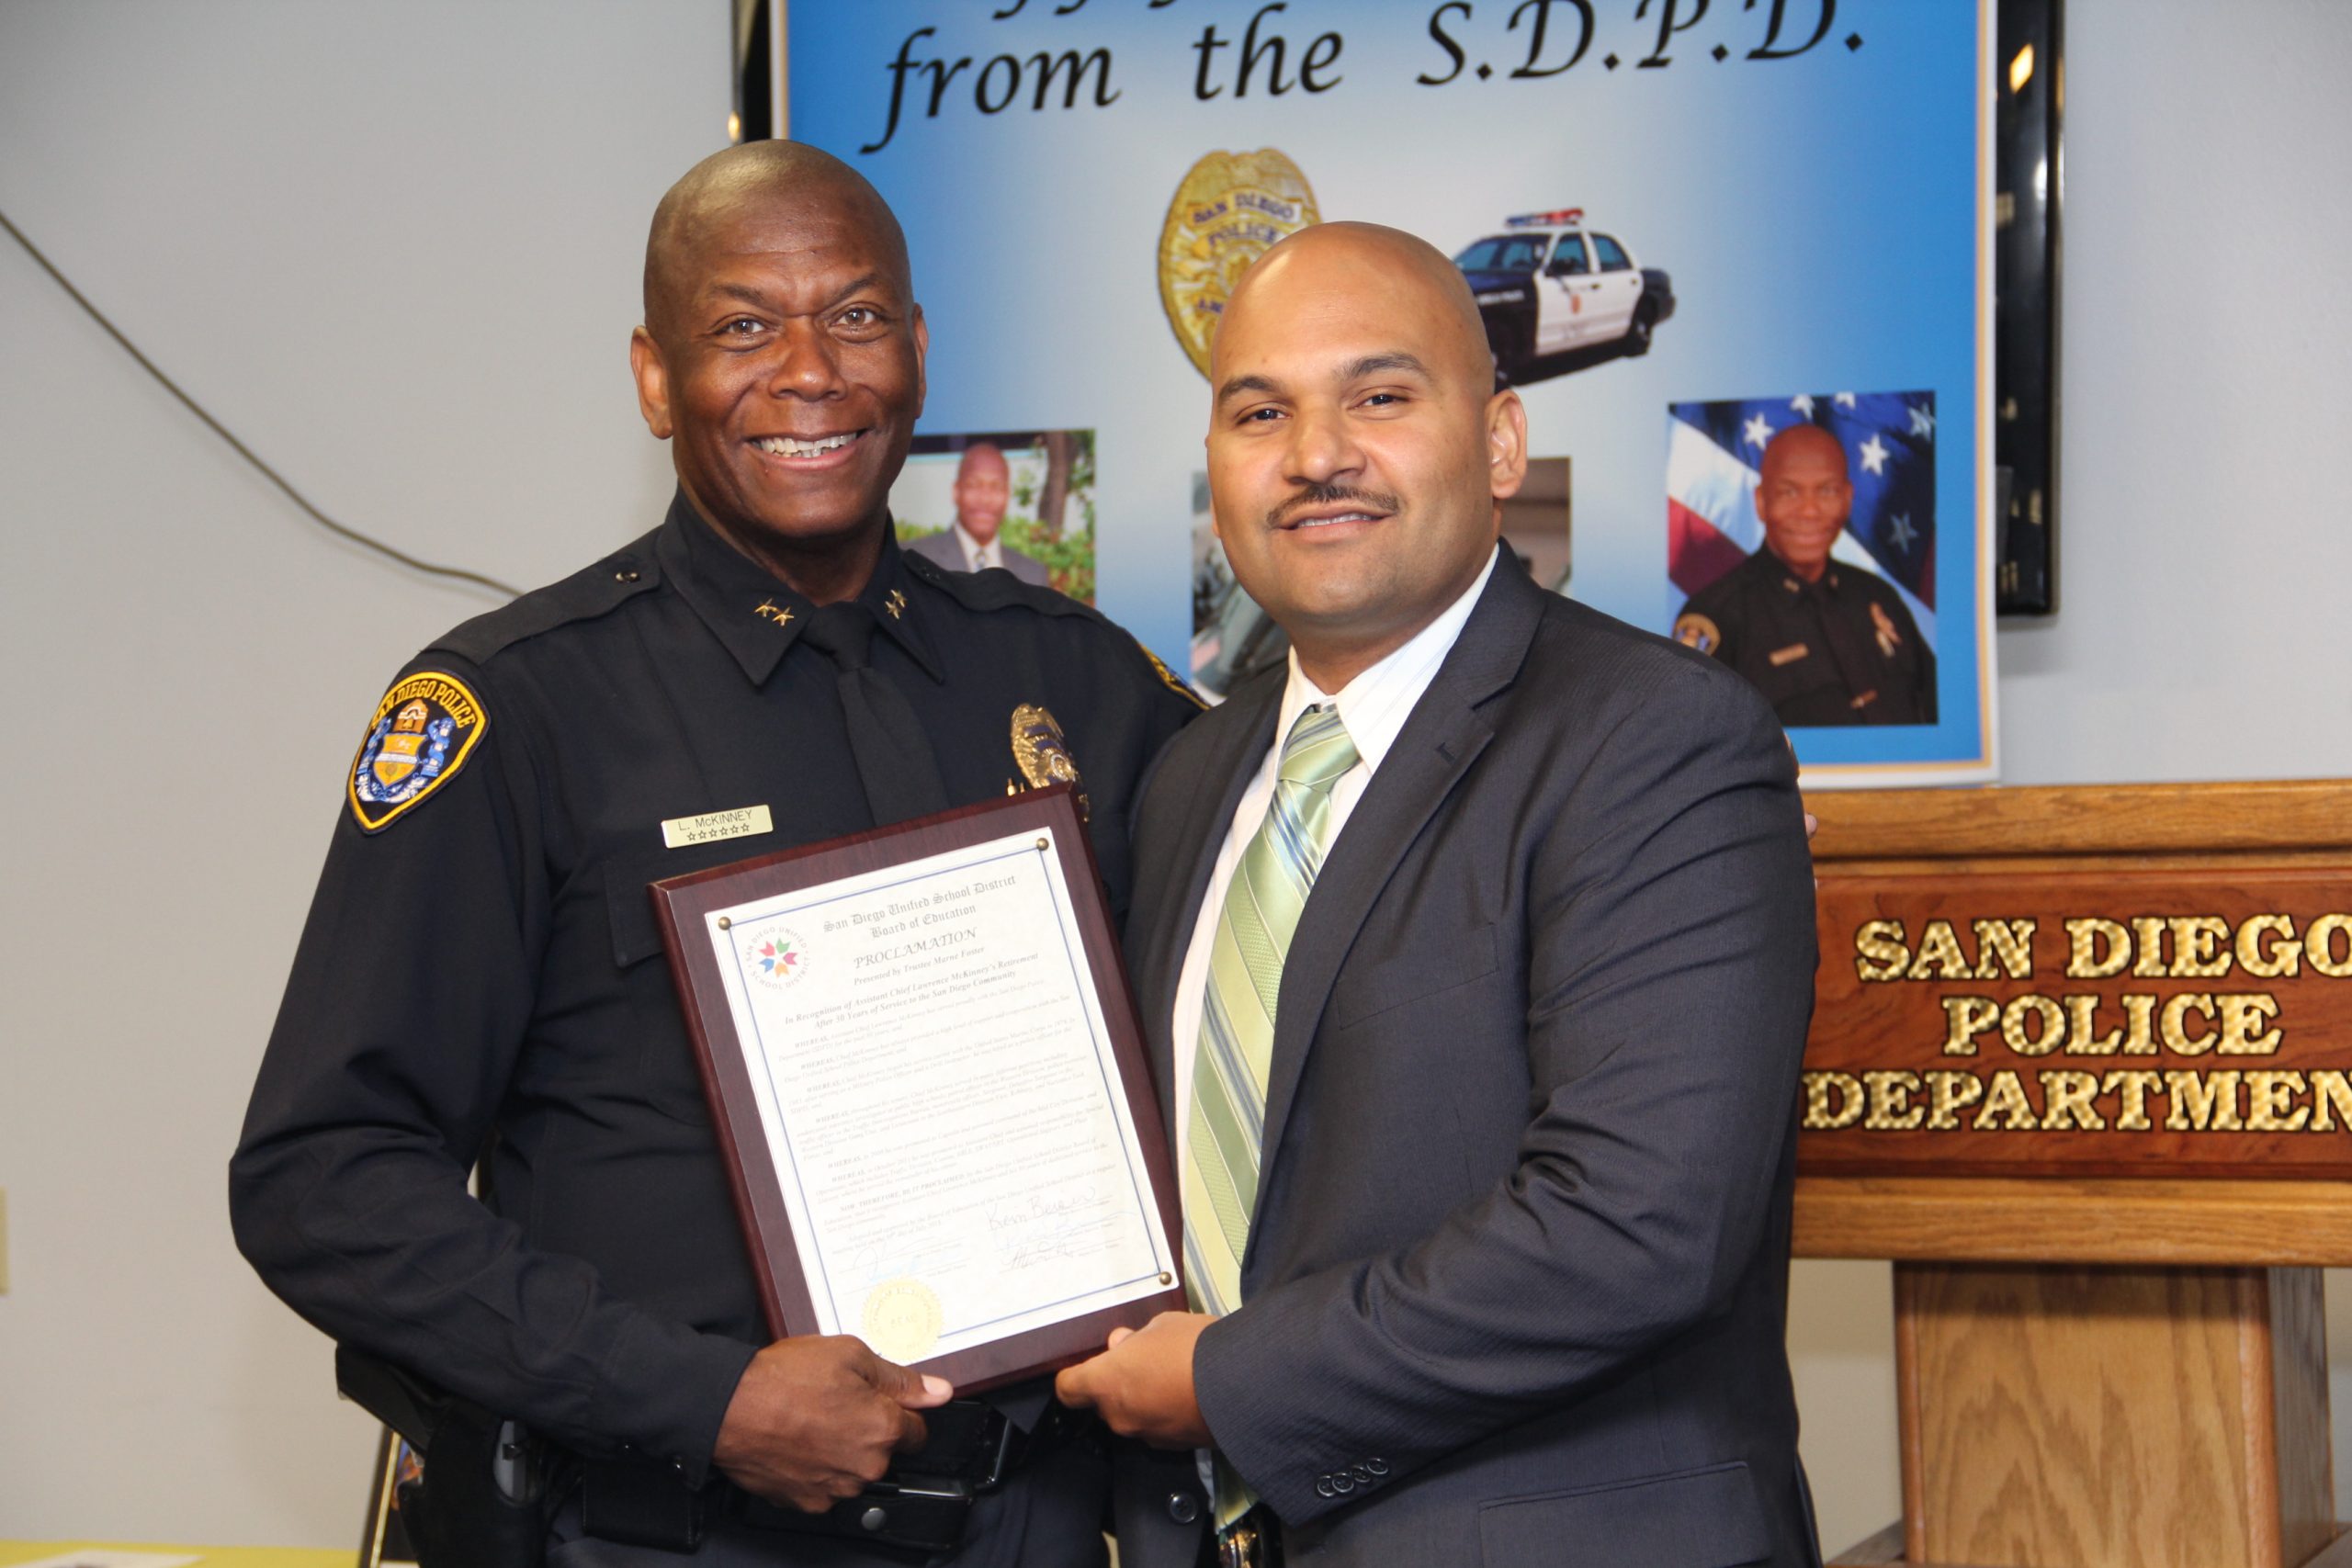 SAN DIEGANS CELEBRATE CHIEF LAWRENCE MCKINNEY’S 30 YEARS OF SERVICE!